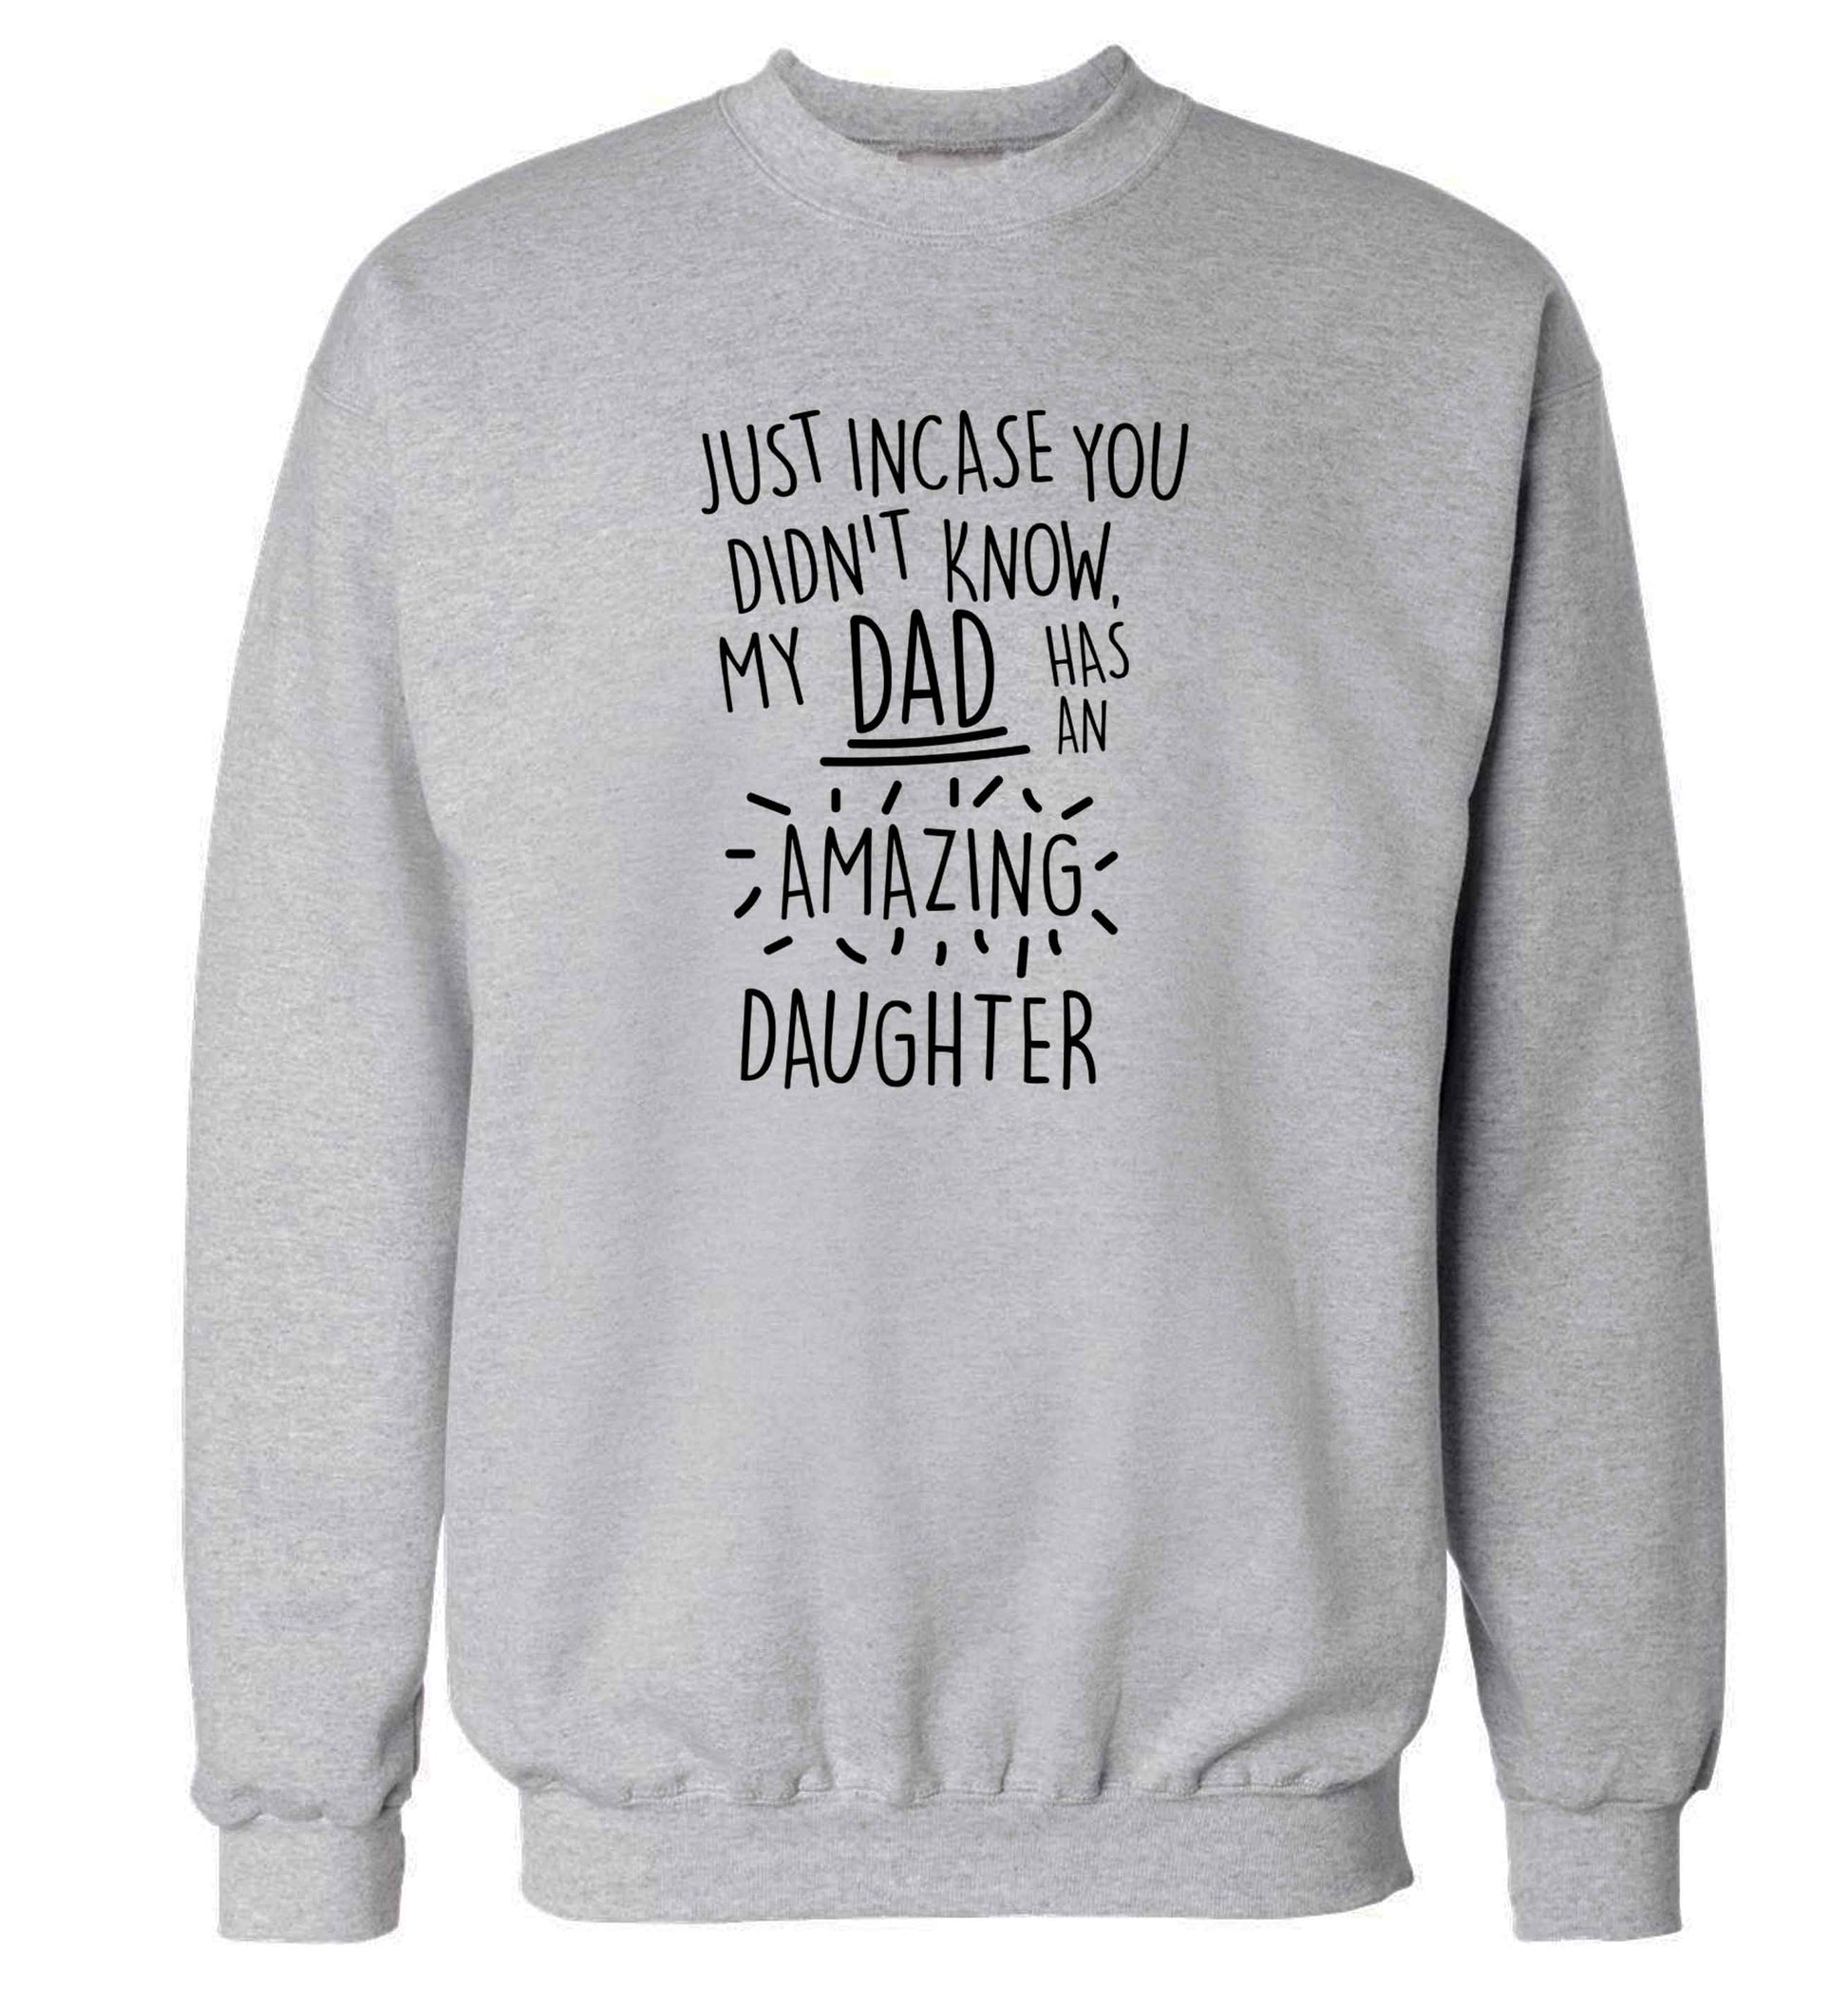 Just incase you didn't know my dad has an amazing daughter adult's unisex grey sweater 2XL